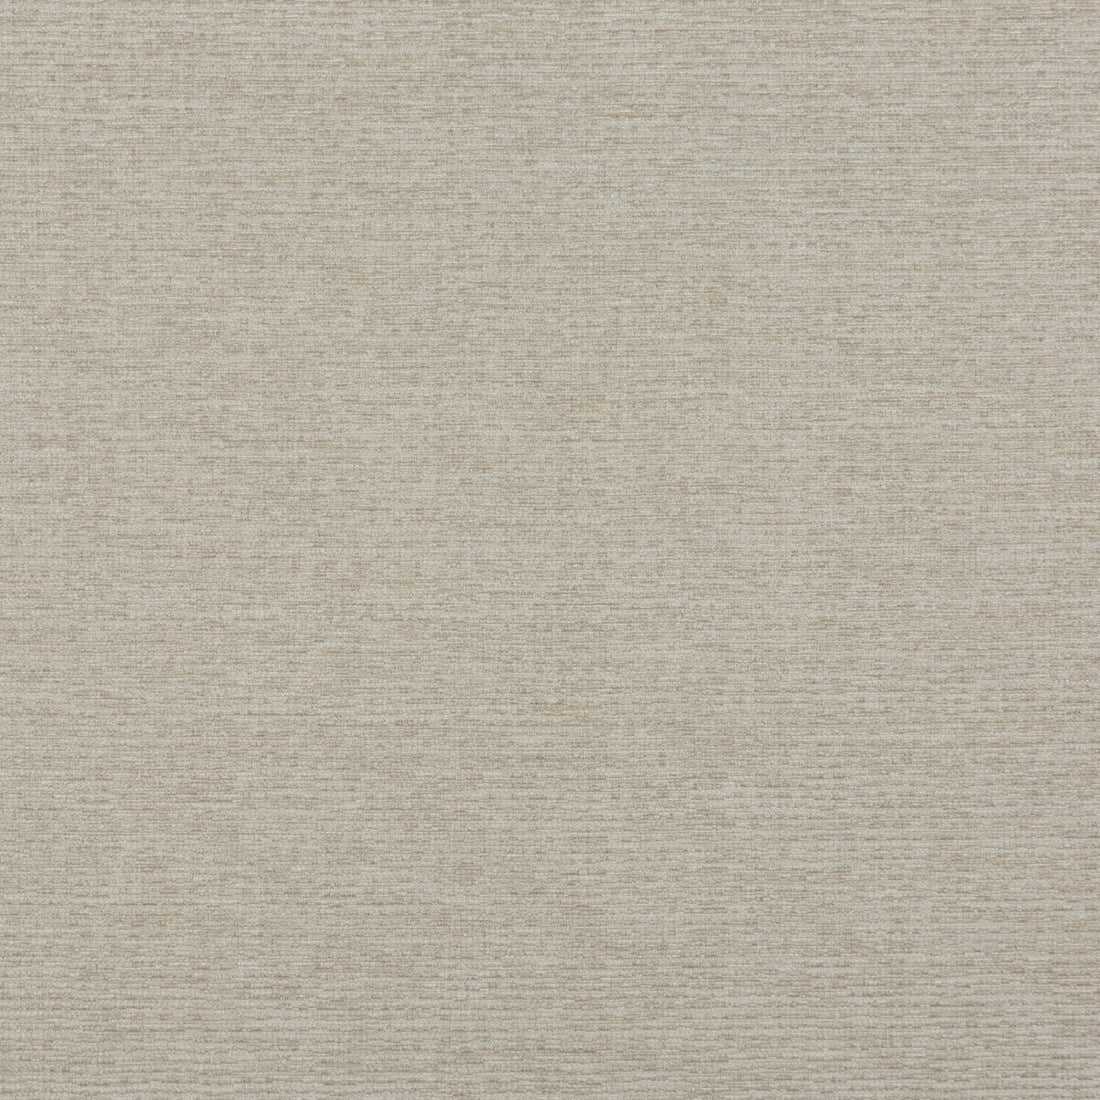 Esker fabric in oatmeal color - pattern BF10685.230.0 - by G P &amp; J Baker in the Essential Colours collection